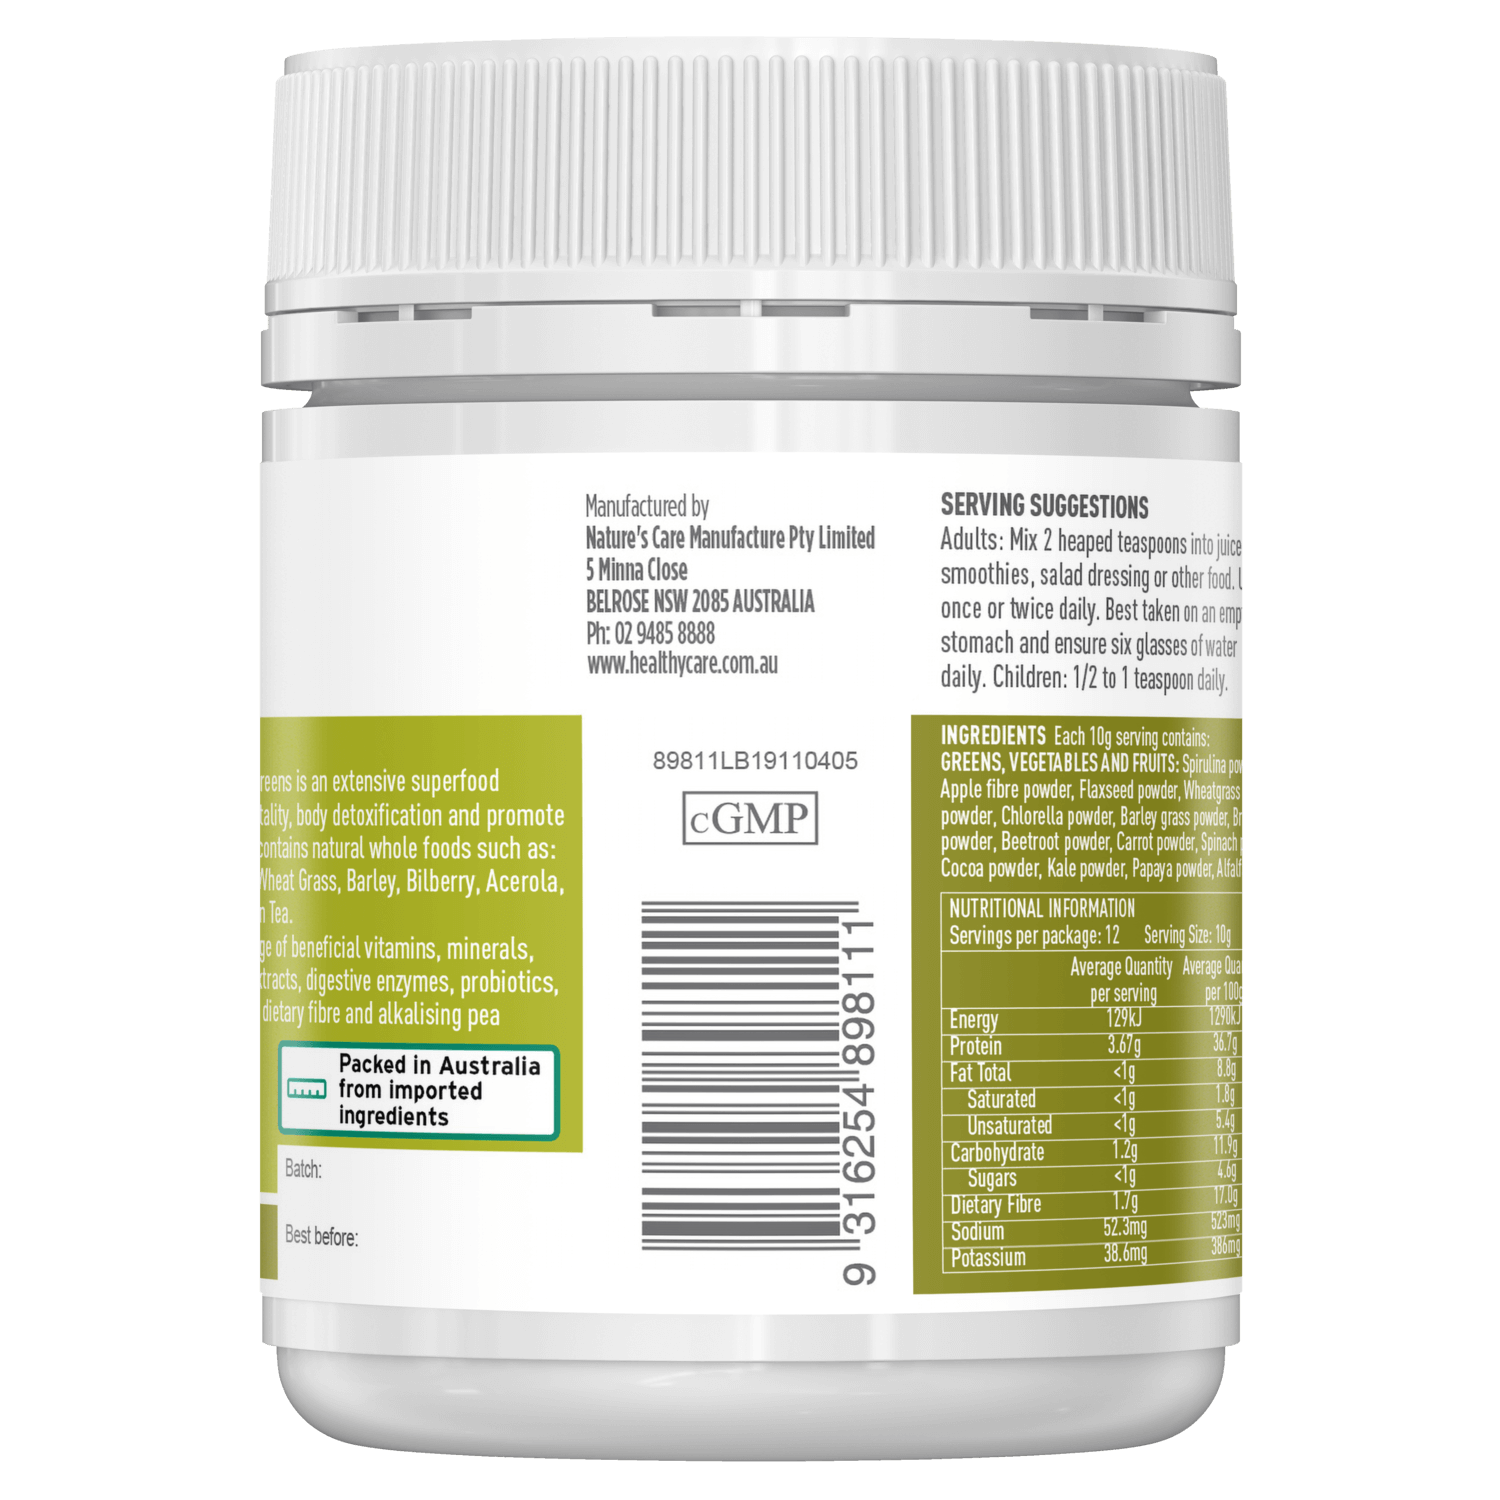 Manufacturer and Barcode of Super Greens 120g Powder-Vitamins & Supplements-Healthy Care Australia